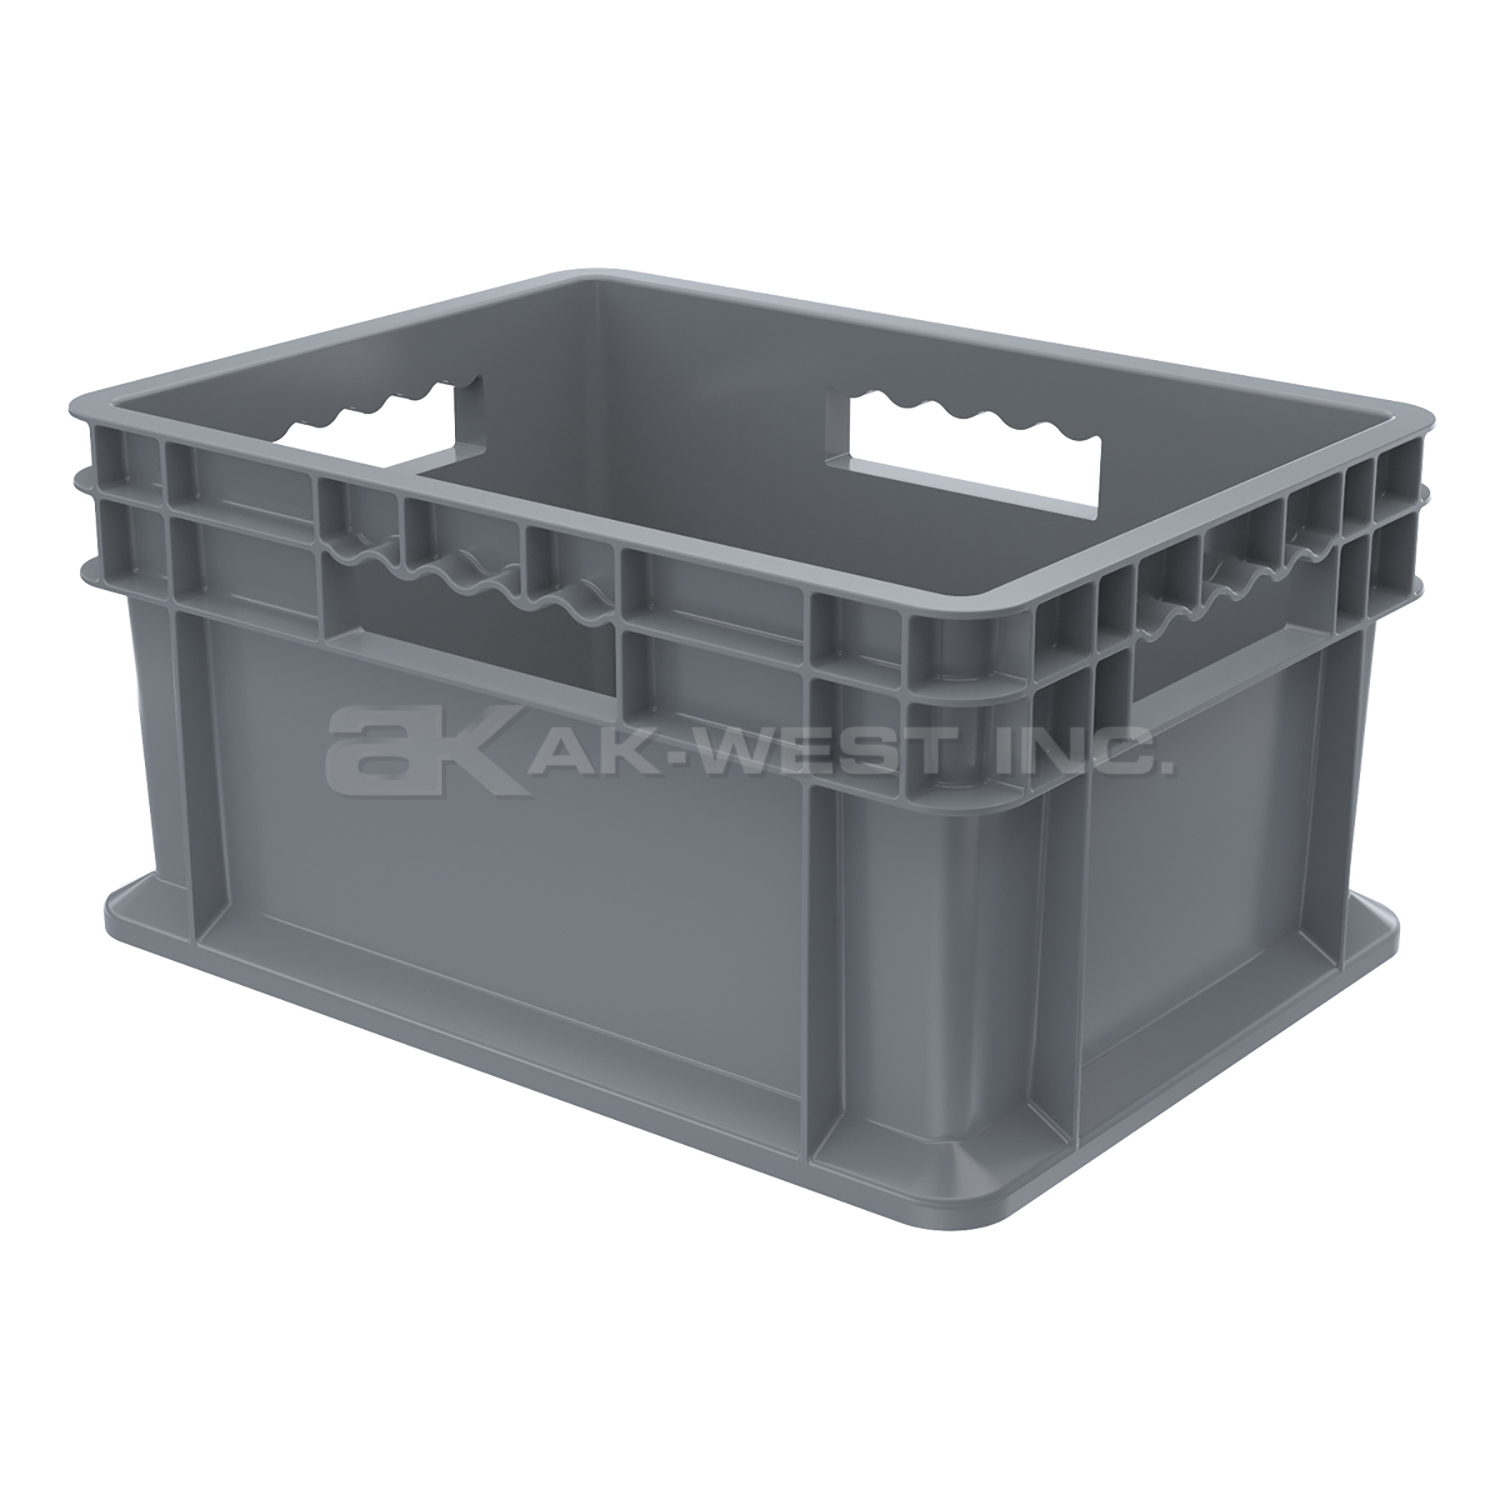 Grey, 15-3/4" x 11-3/4" x 8-1/4", Solid Side and Base, Straight Wall Container (12 Per Carton)